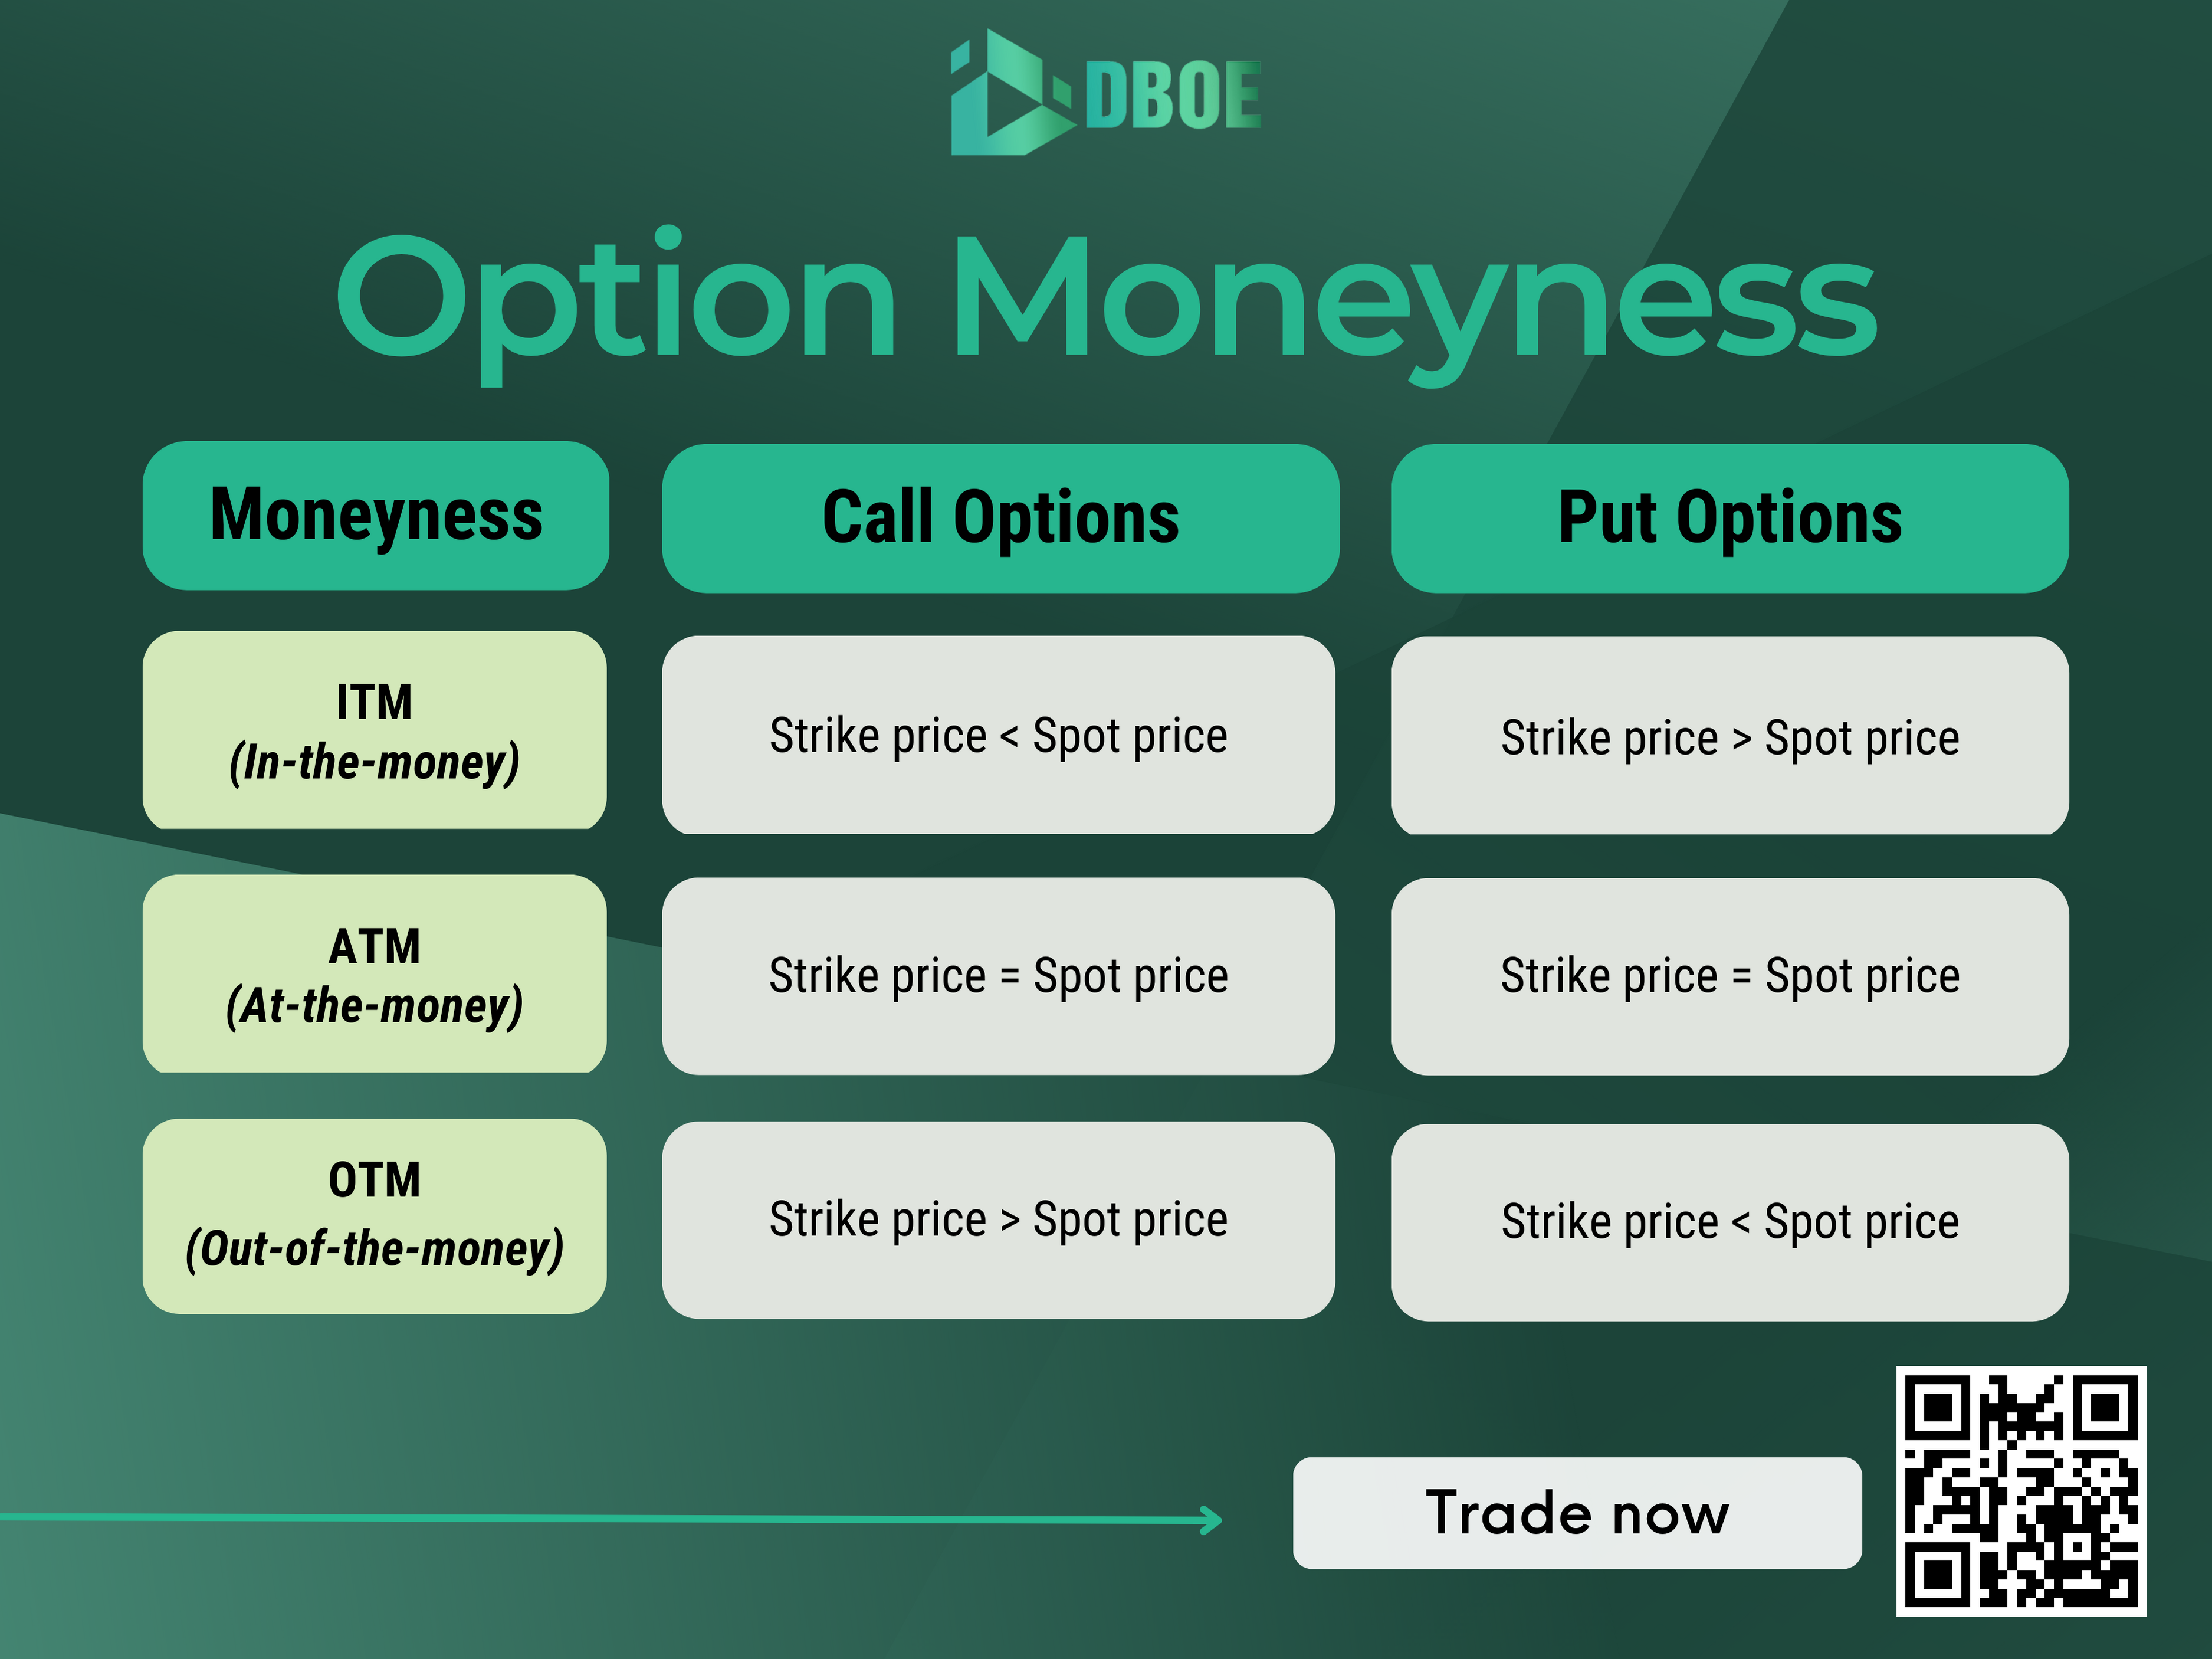 Figure 1: Option Moneyness - DBOE Guide to Options Trading